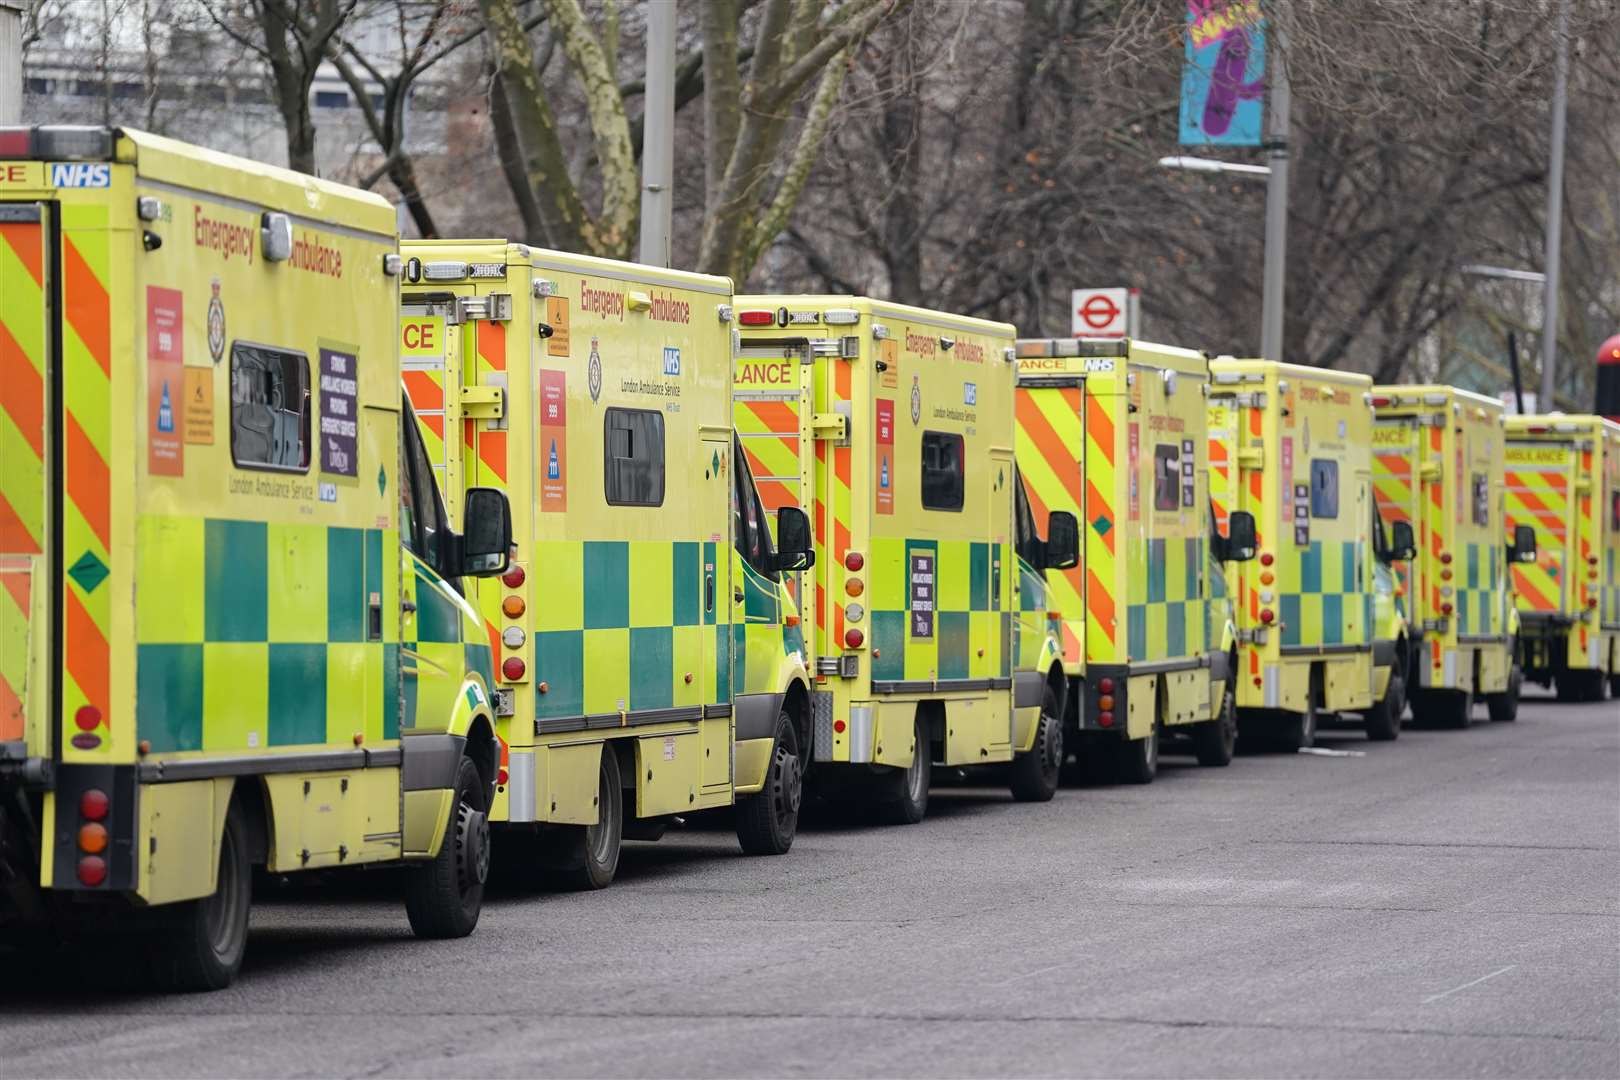 Ambulances ‘lost’ nearly two million hours last year while queuing outside A&E departments, ambulance chiefs have said (PA)